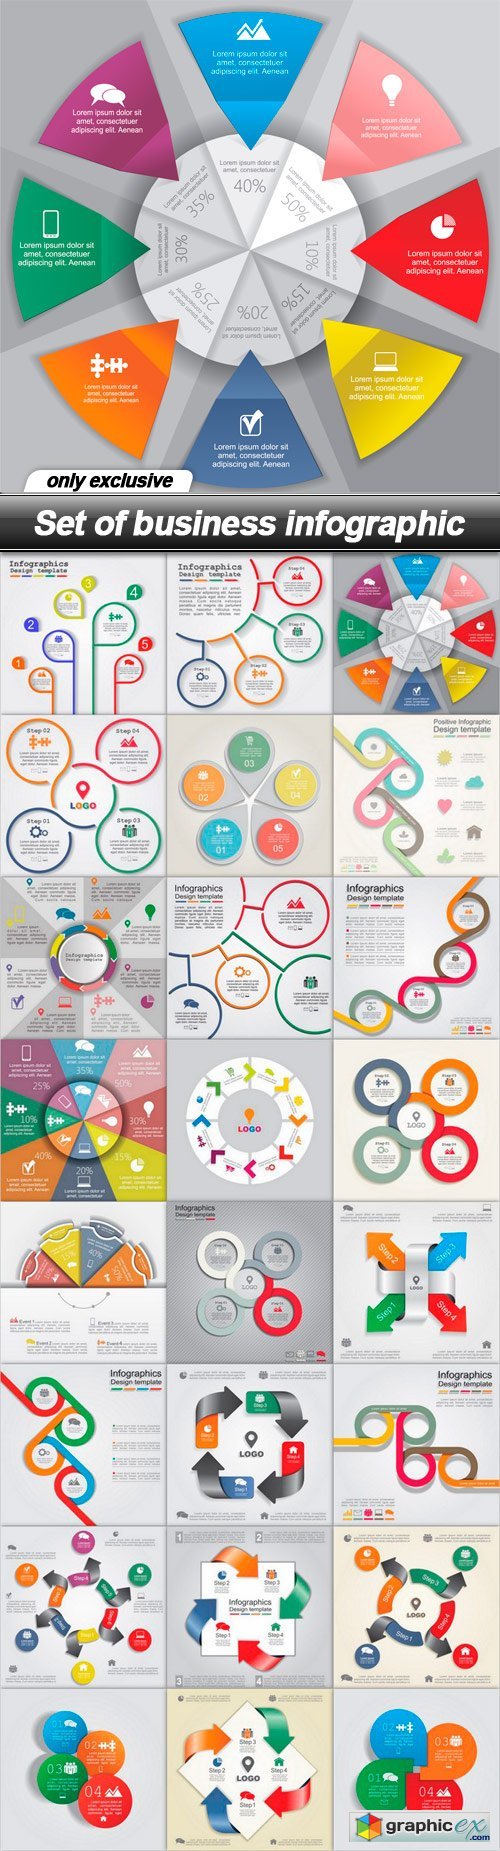 Set of business infographic - 24 EPS